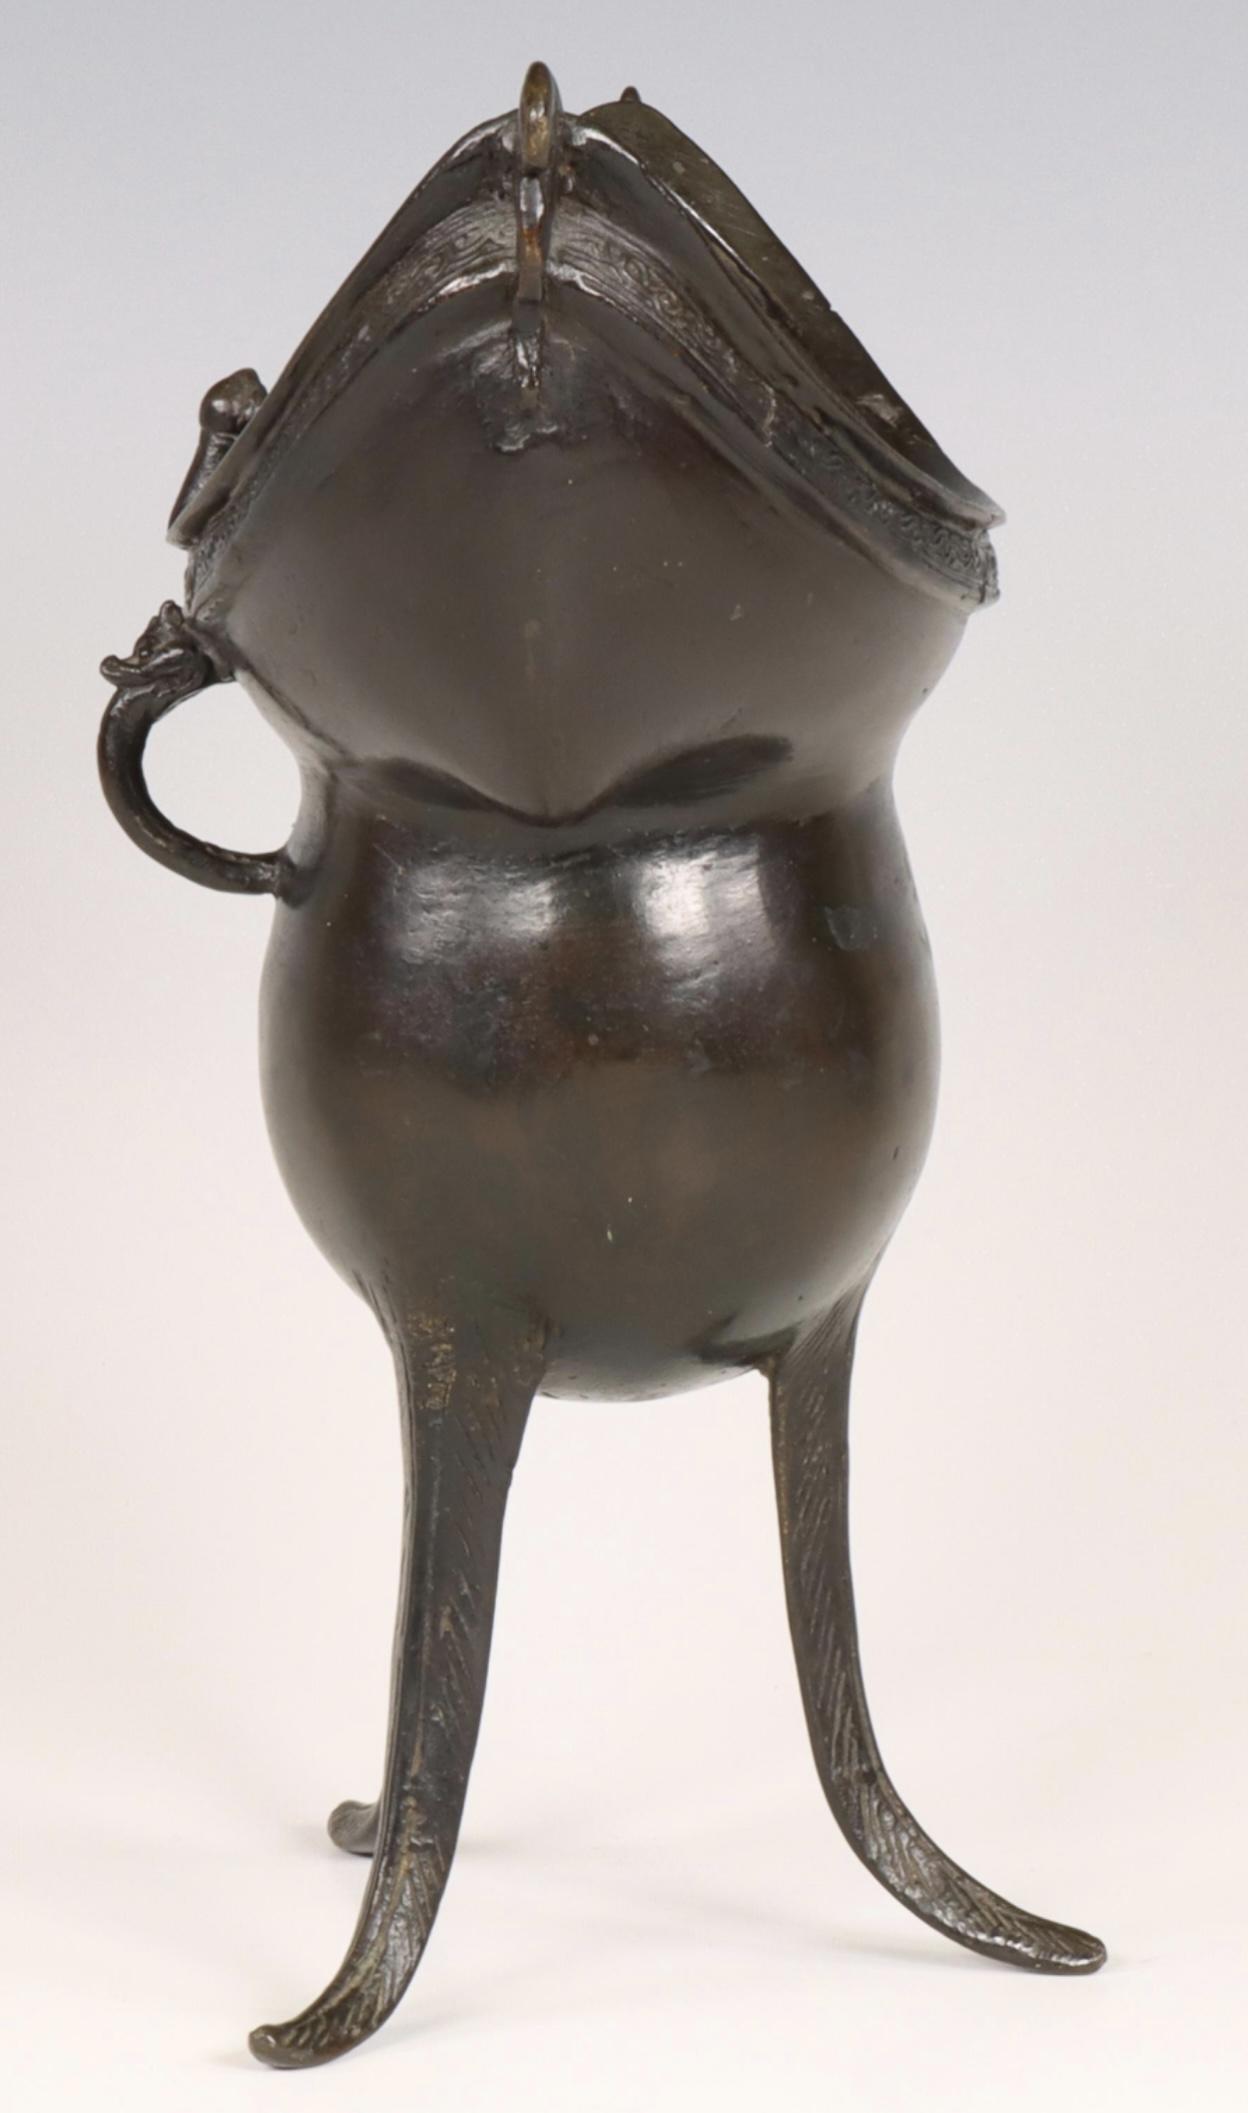 China, a bronze tripod ritual wine vessel, yue, Yuan or early Ming dynasty, 14th/ 15th century, - Image 4 of 5